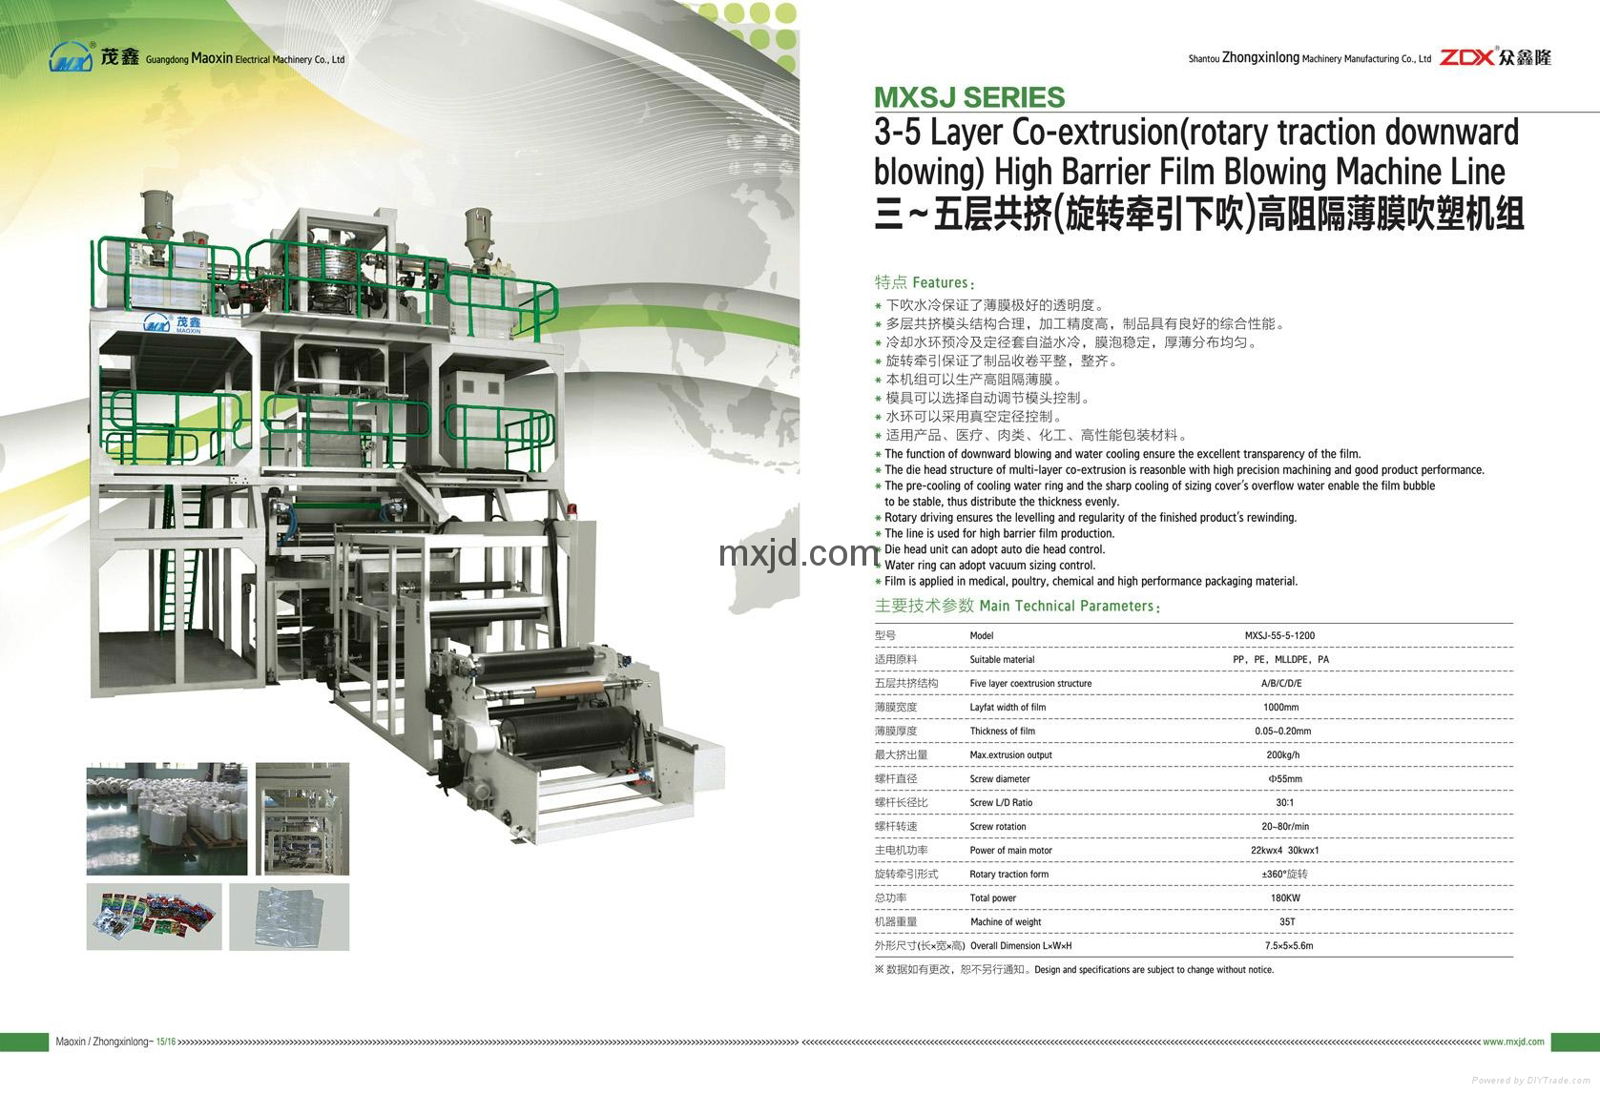 Co-extrusion (Rotary Traction Downward Blowing) Film Blowing Machine Line 2